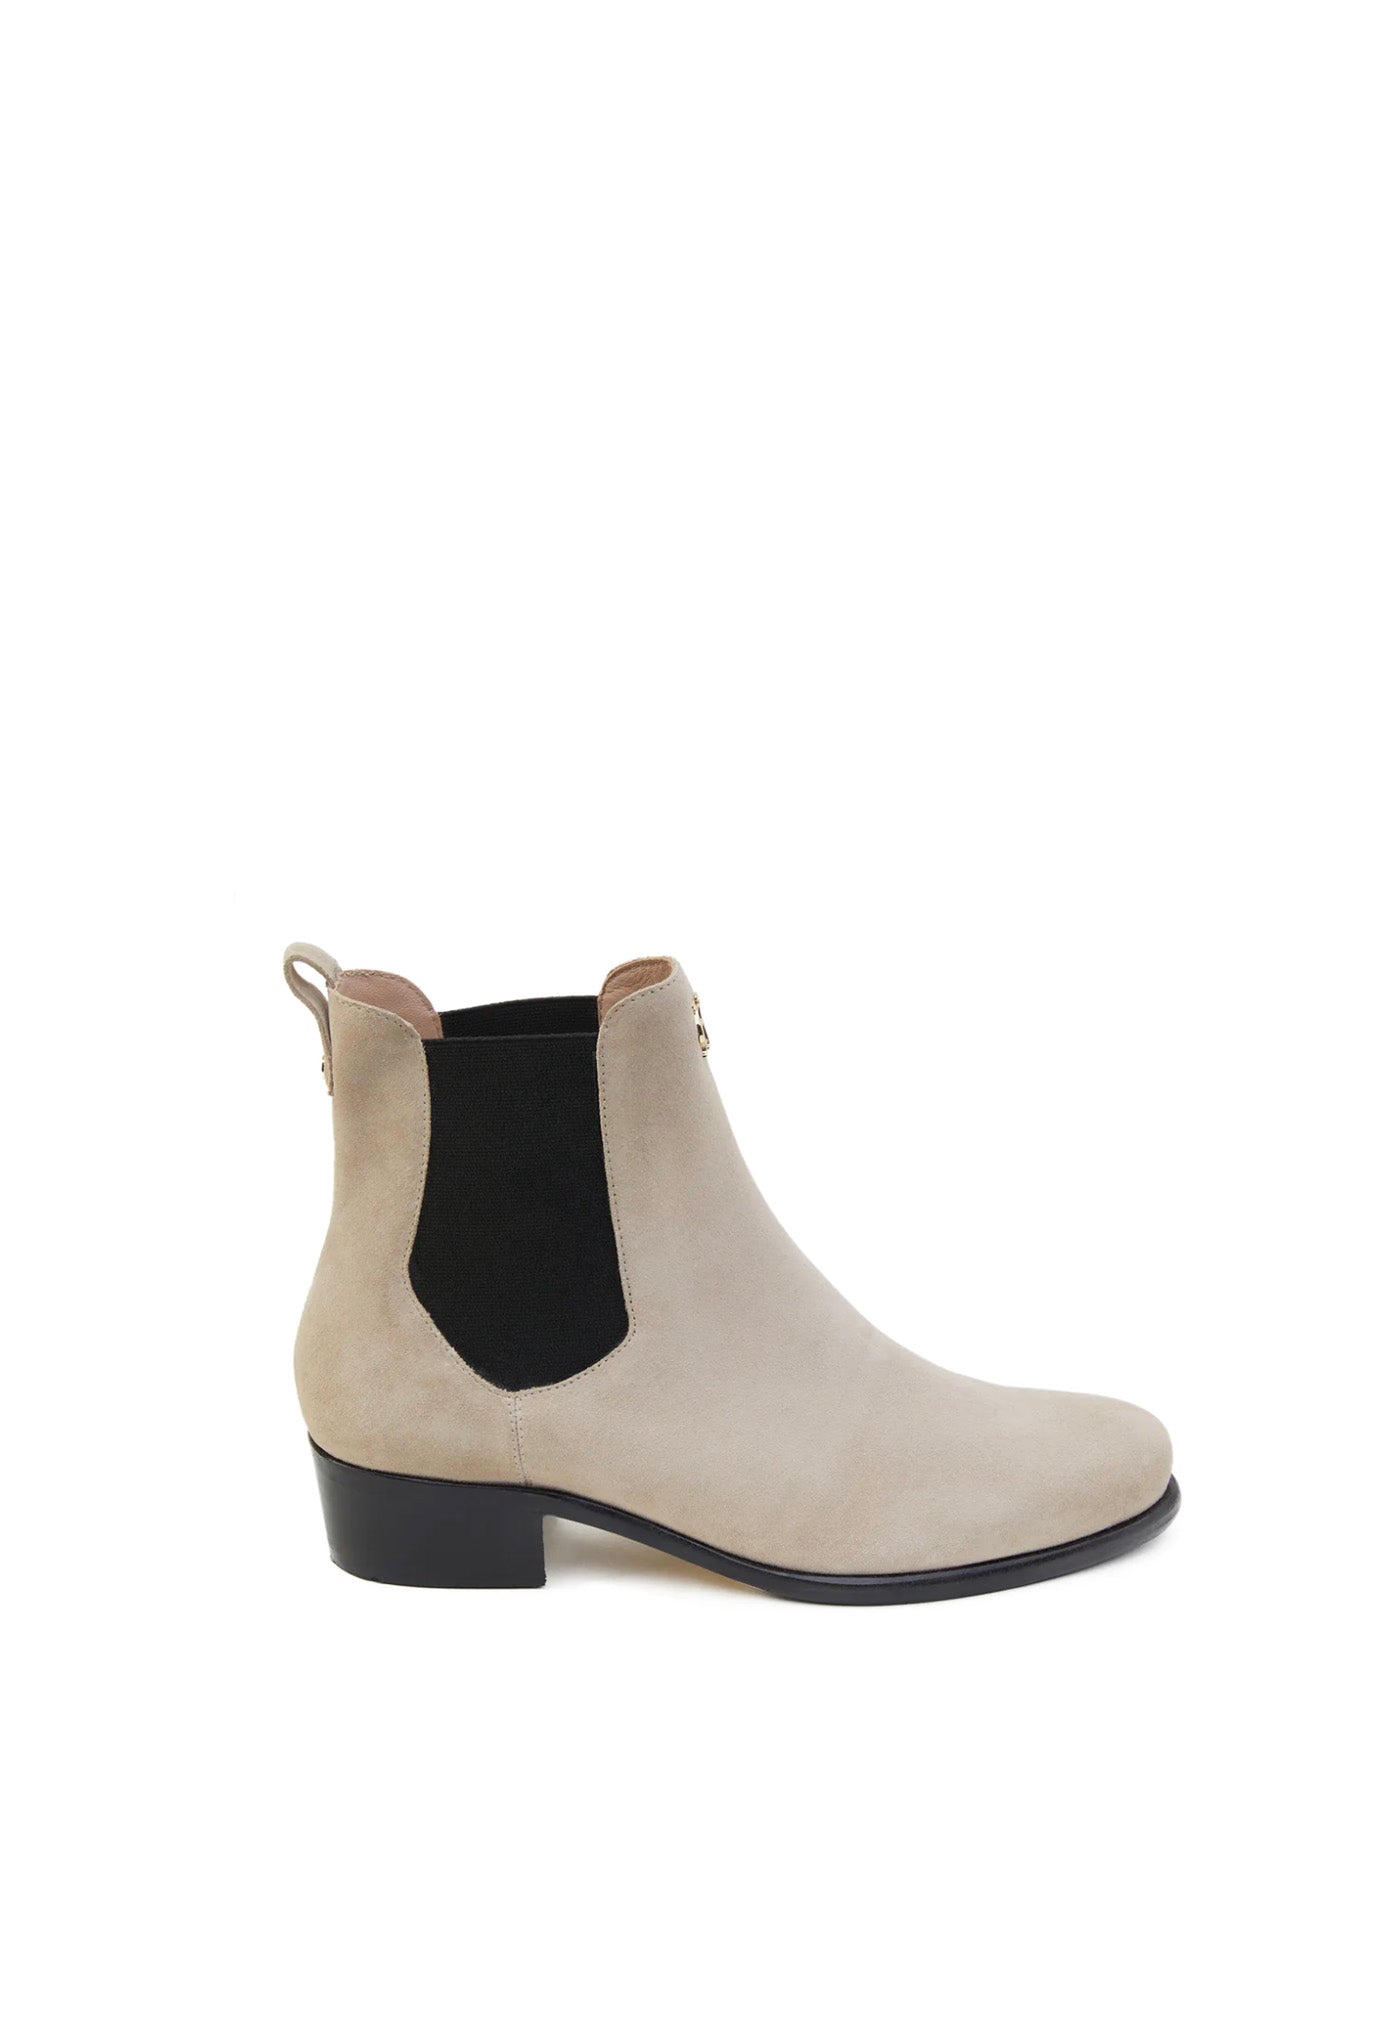 Chelsea Low Boot - Taupe Suede sold by Angel Divine